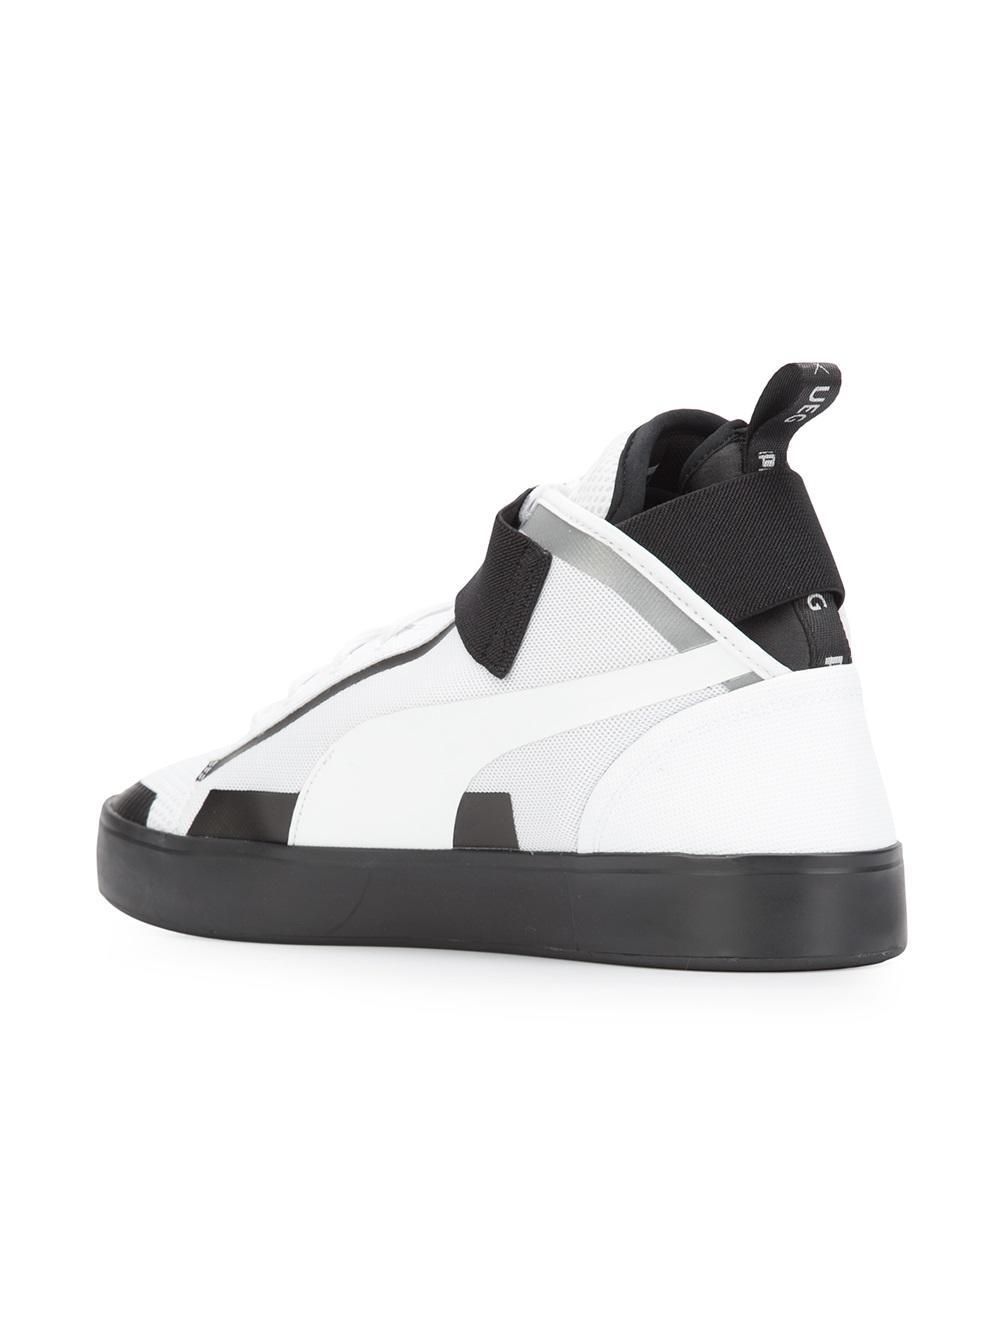 PUMA Rubber X Ueg Hi-top Sneakers in White for Men | Lyst